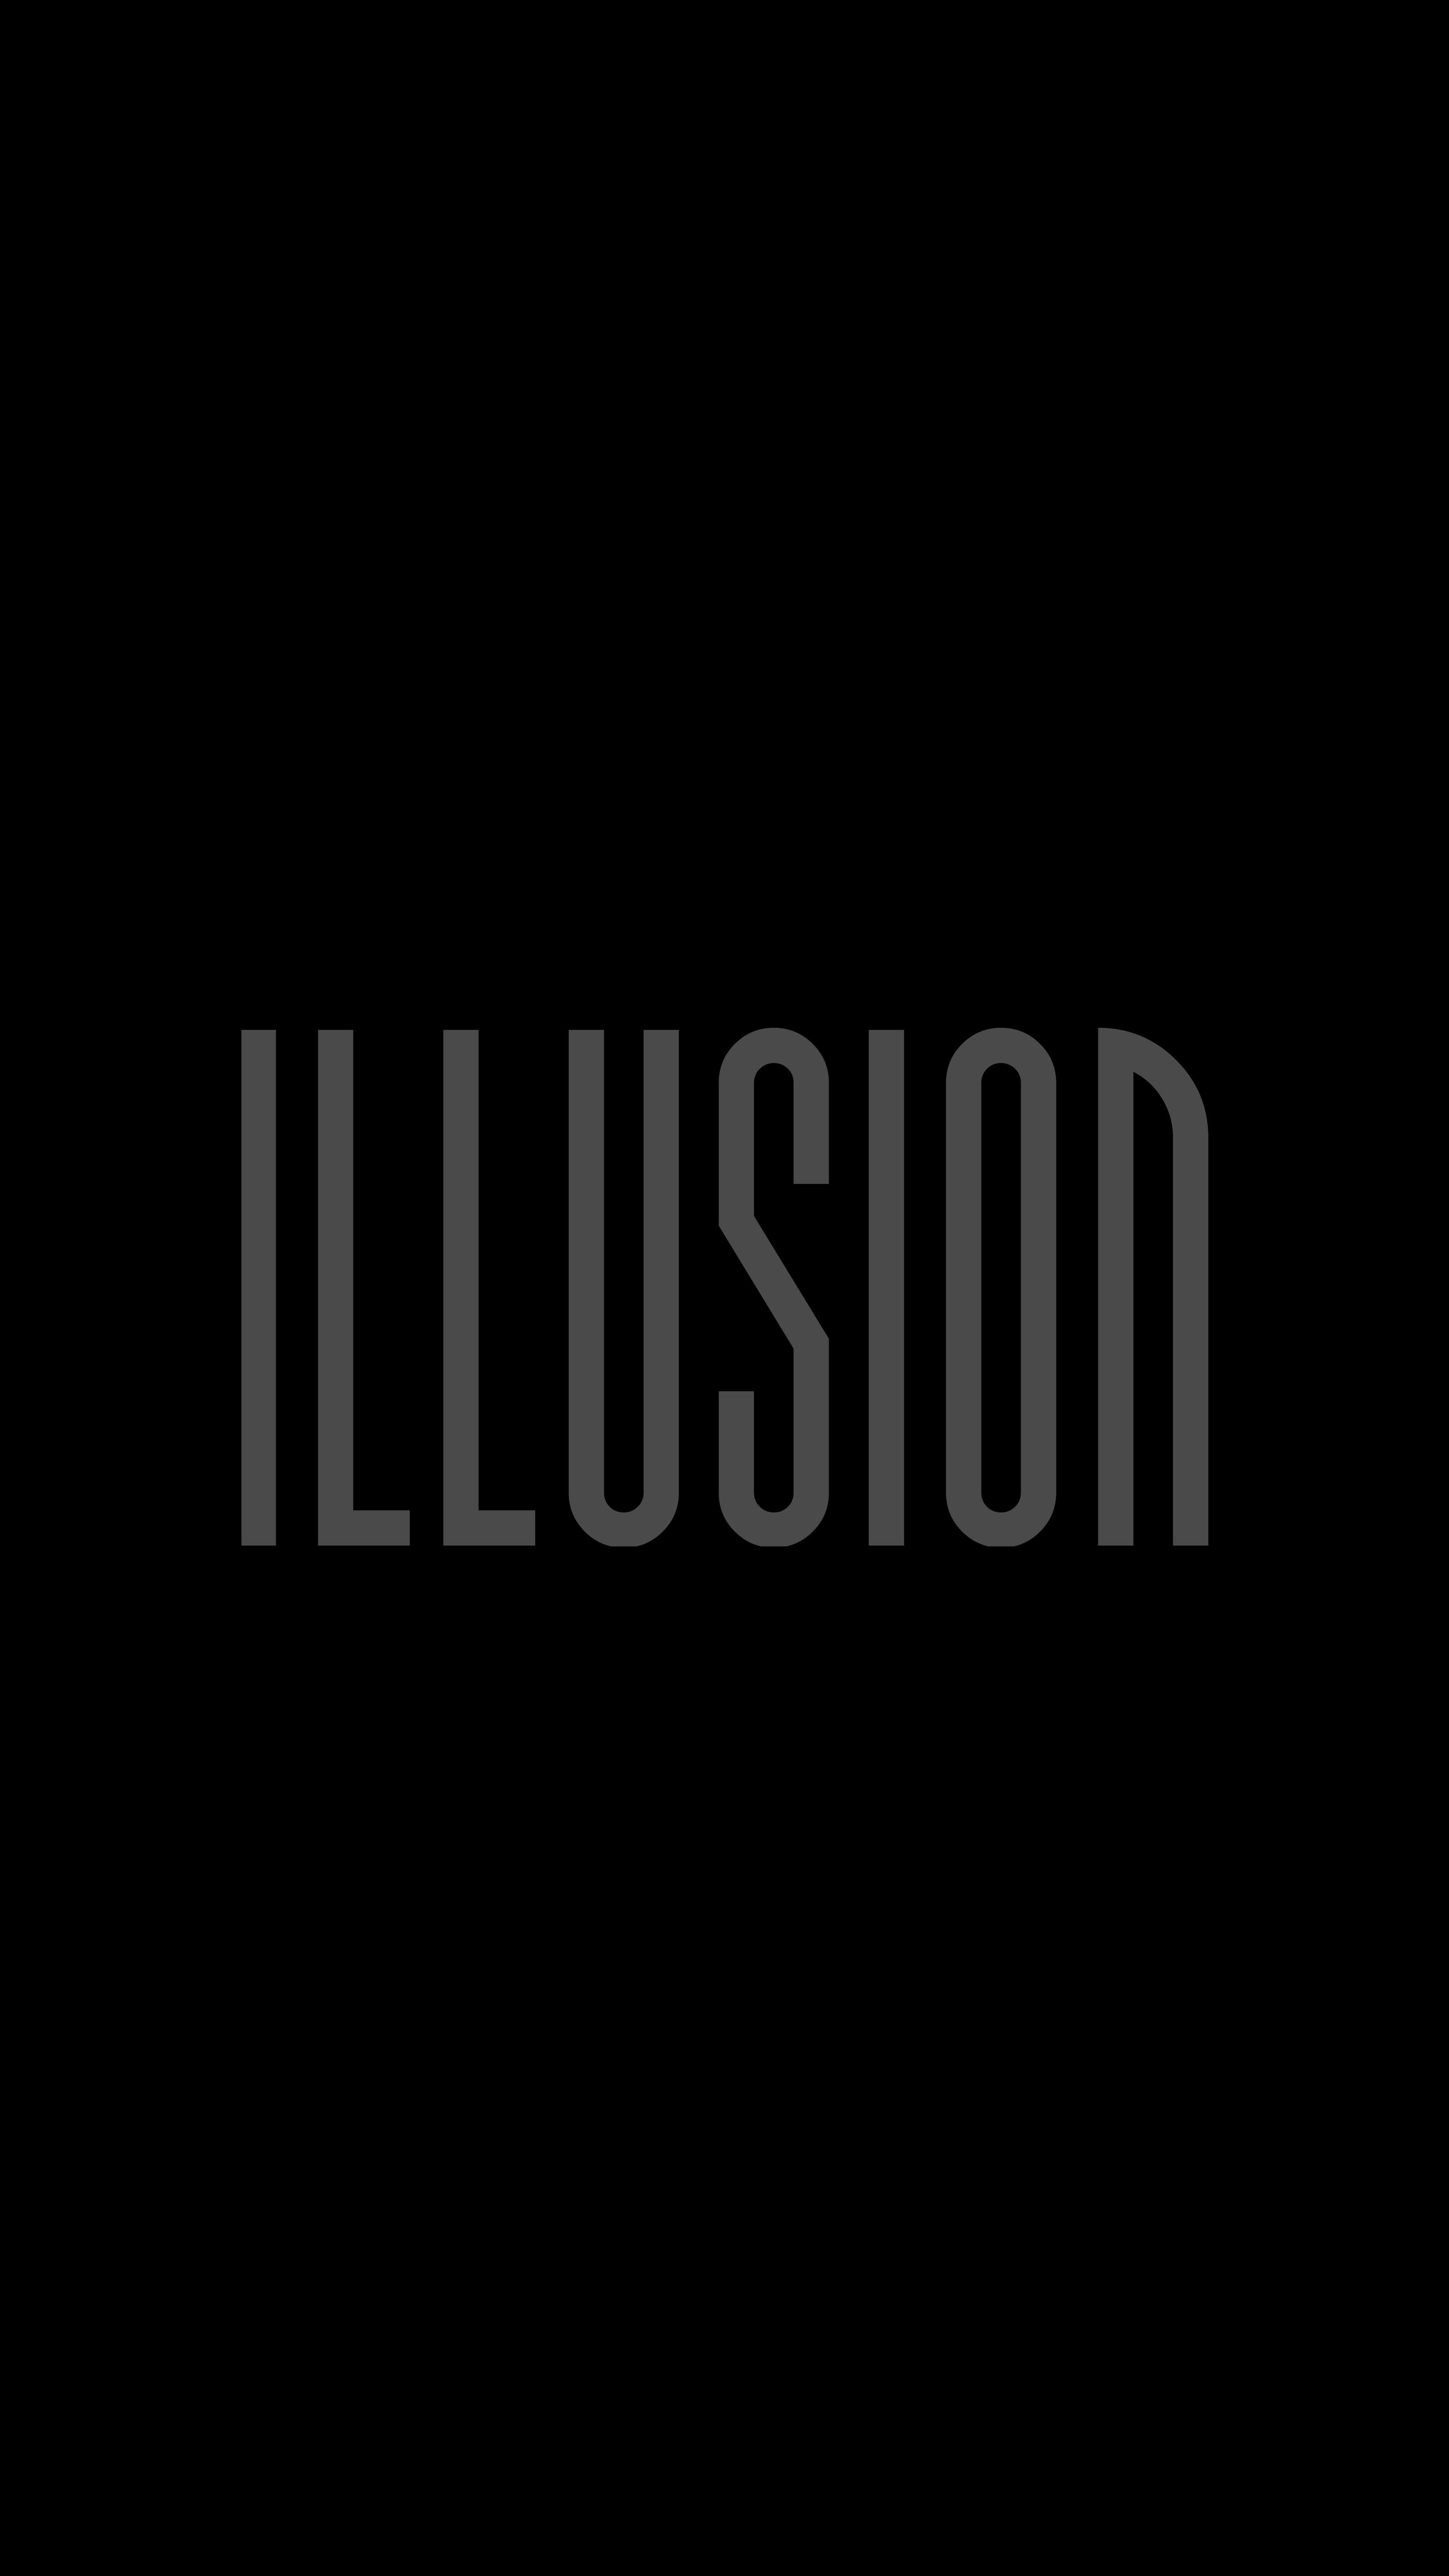 Popular Illusion images for mobile phone